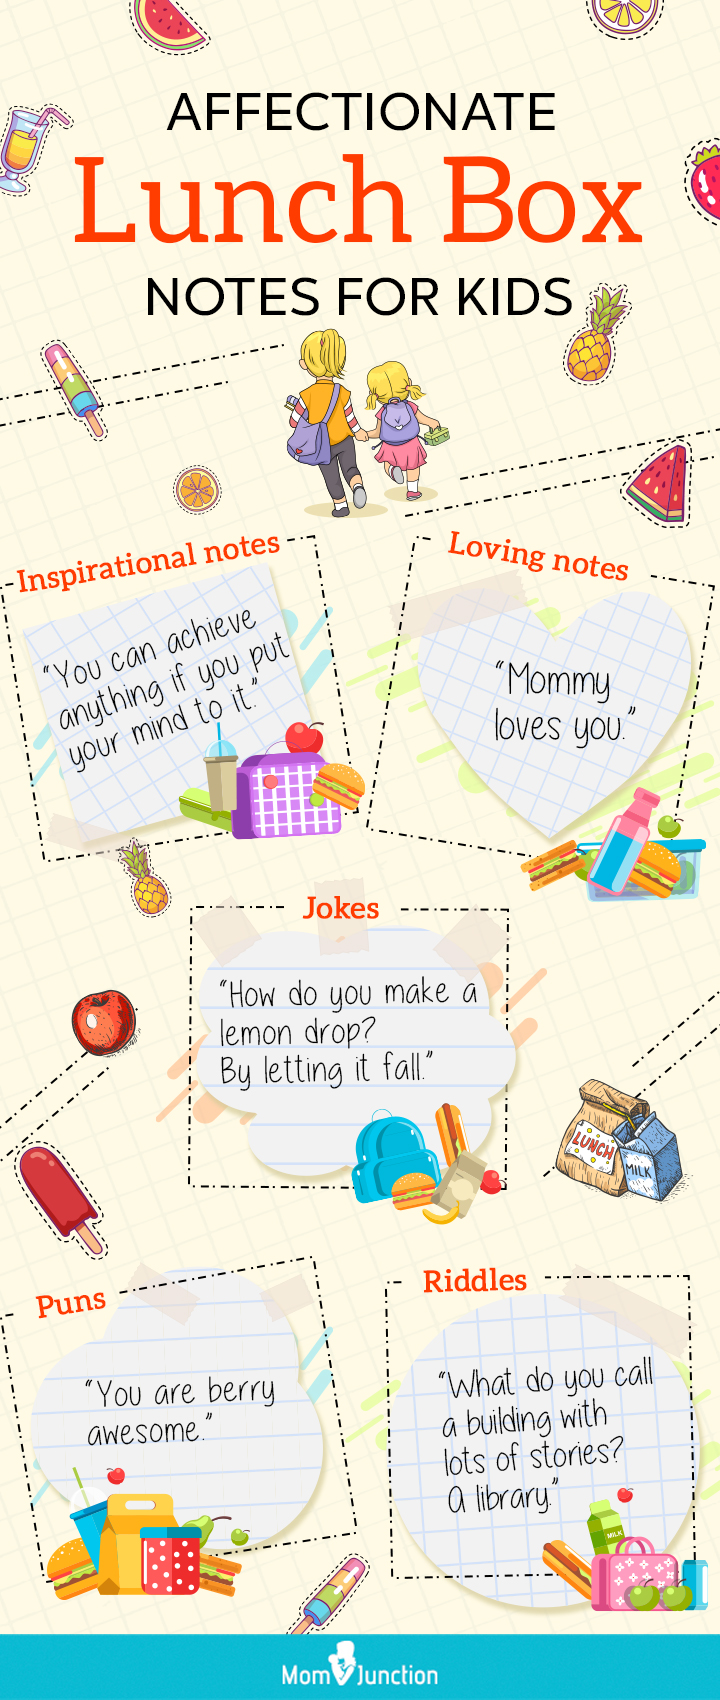 affectionate lunch box notes for kids [Infographic]